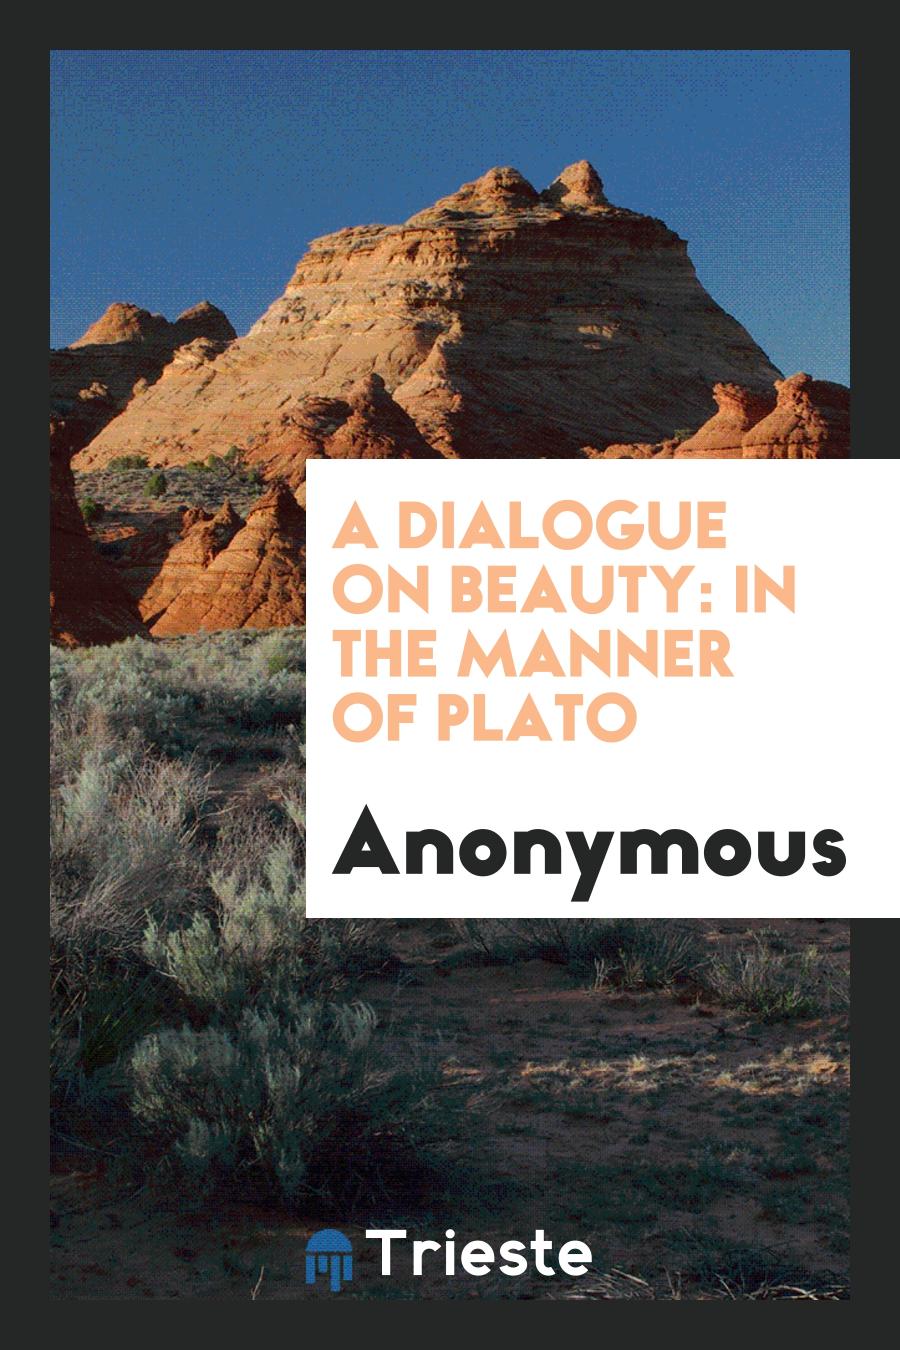 A Dialogue on Beauty: In the Manner of Plato